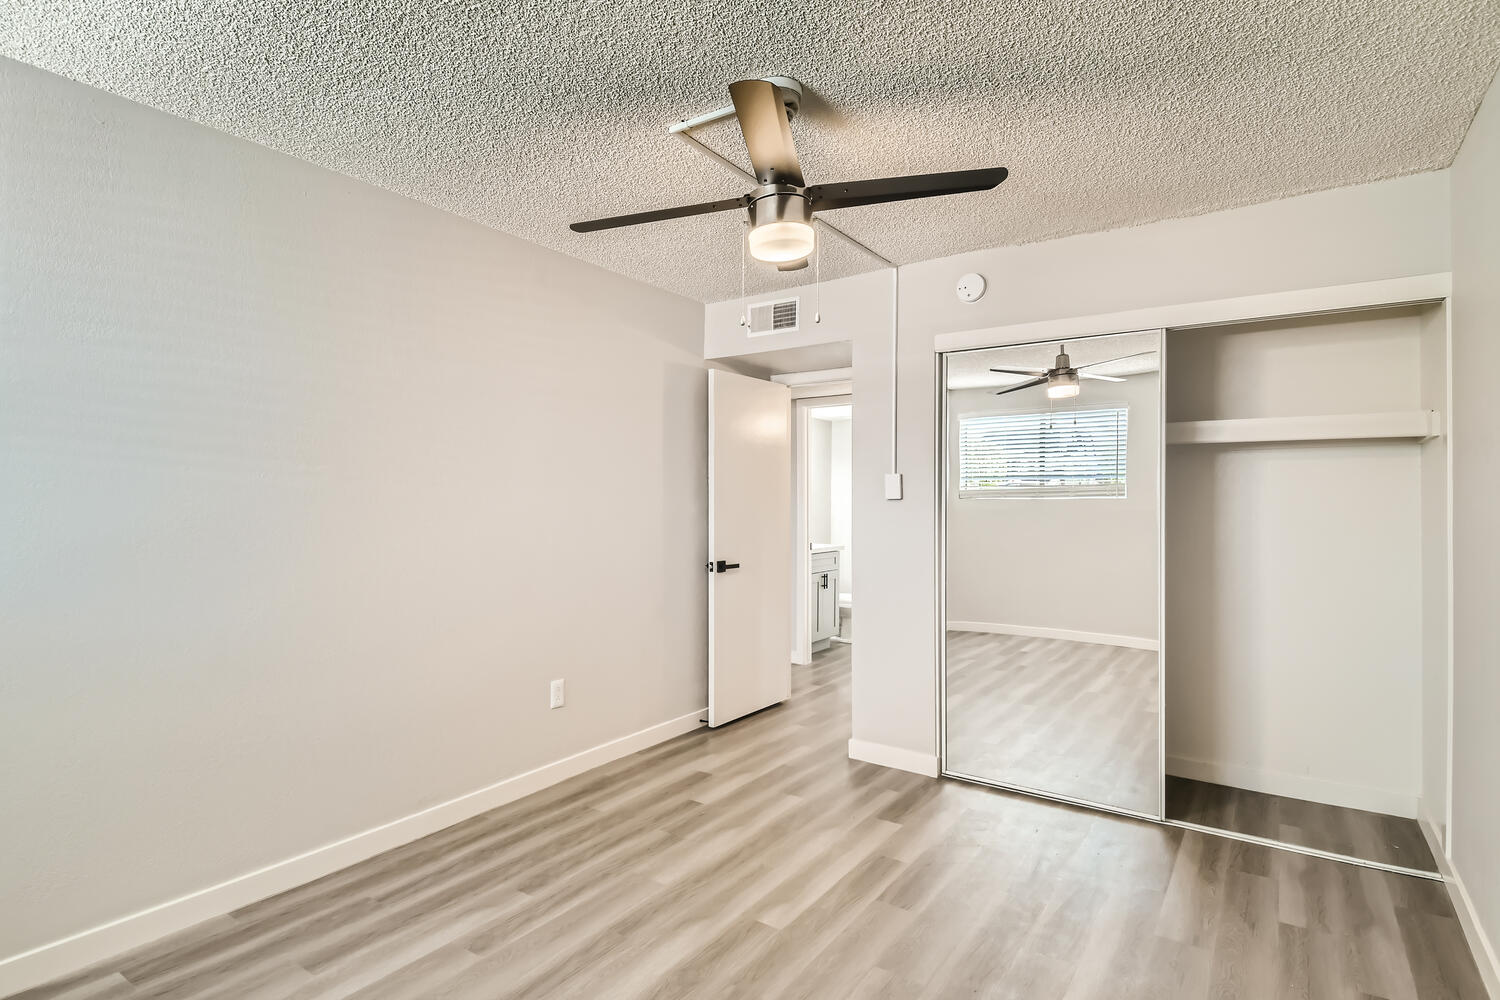 An apartment bedroom with wood-style flooring and a ceiling fan at Rise on McClintock.